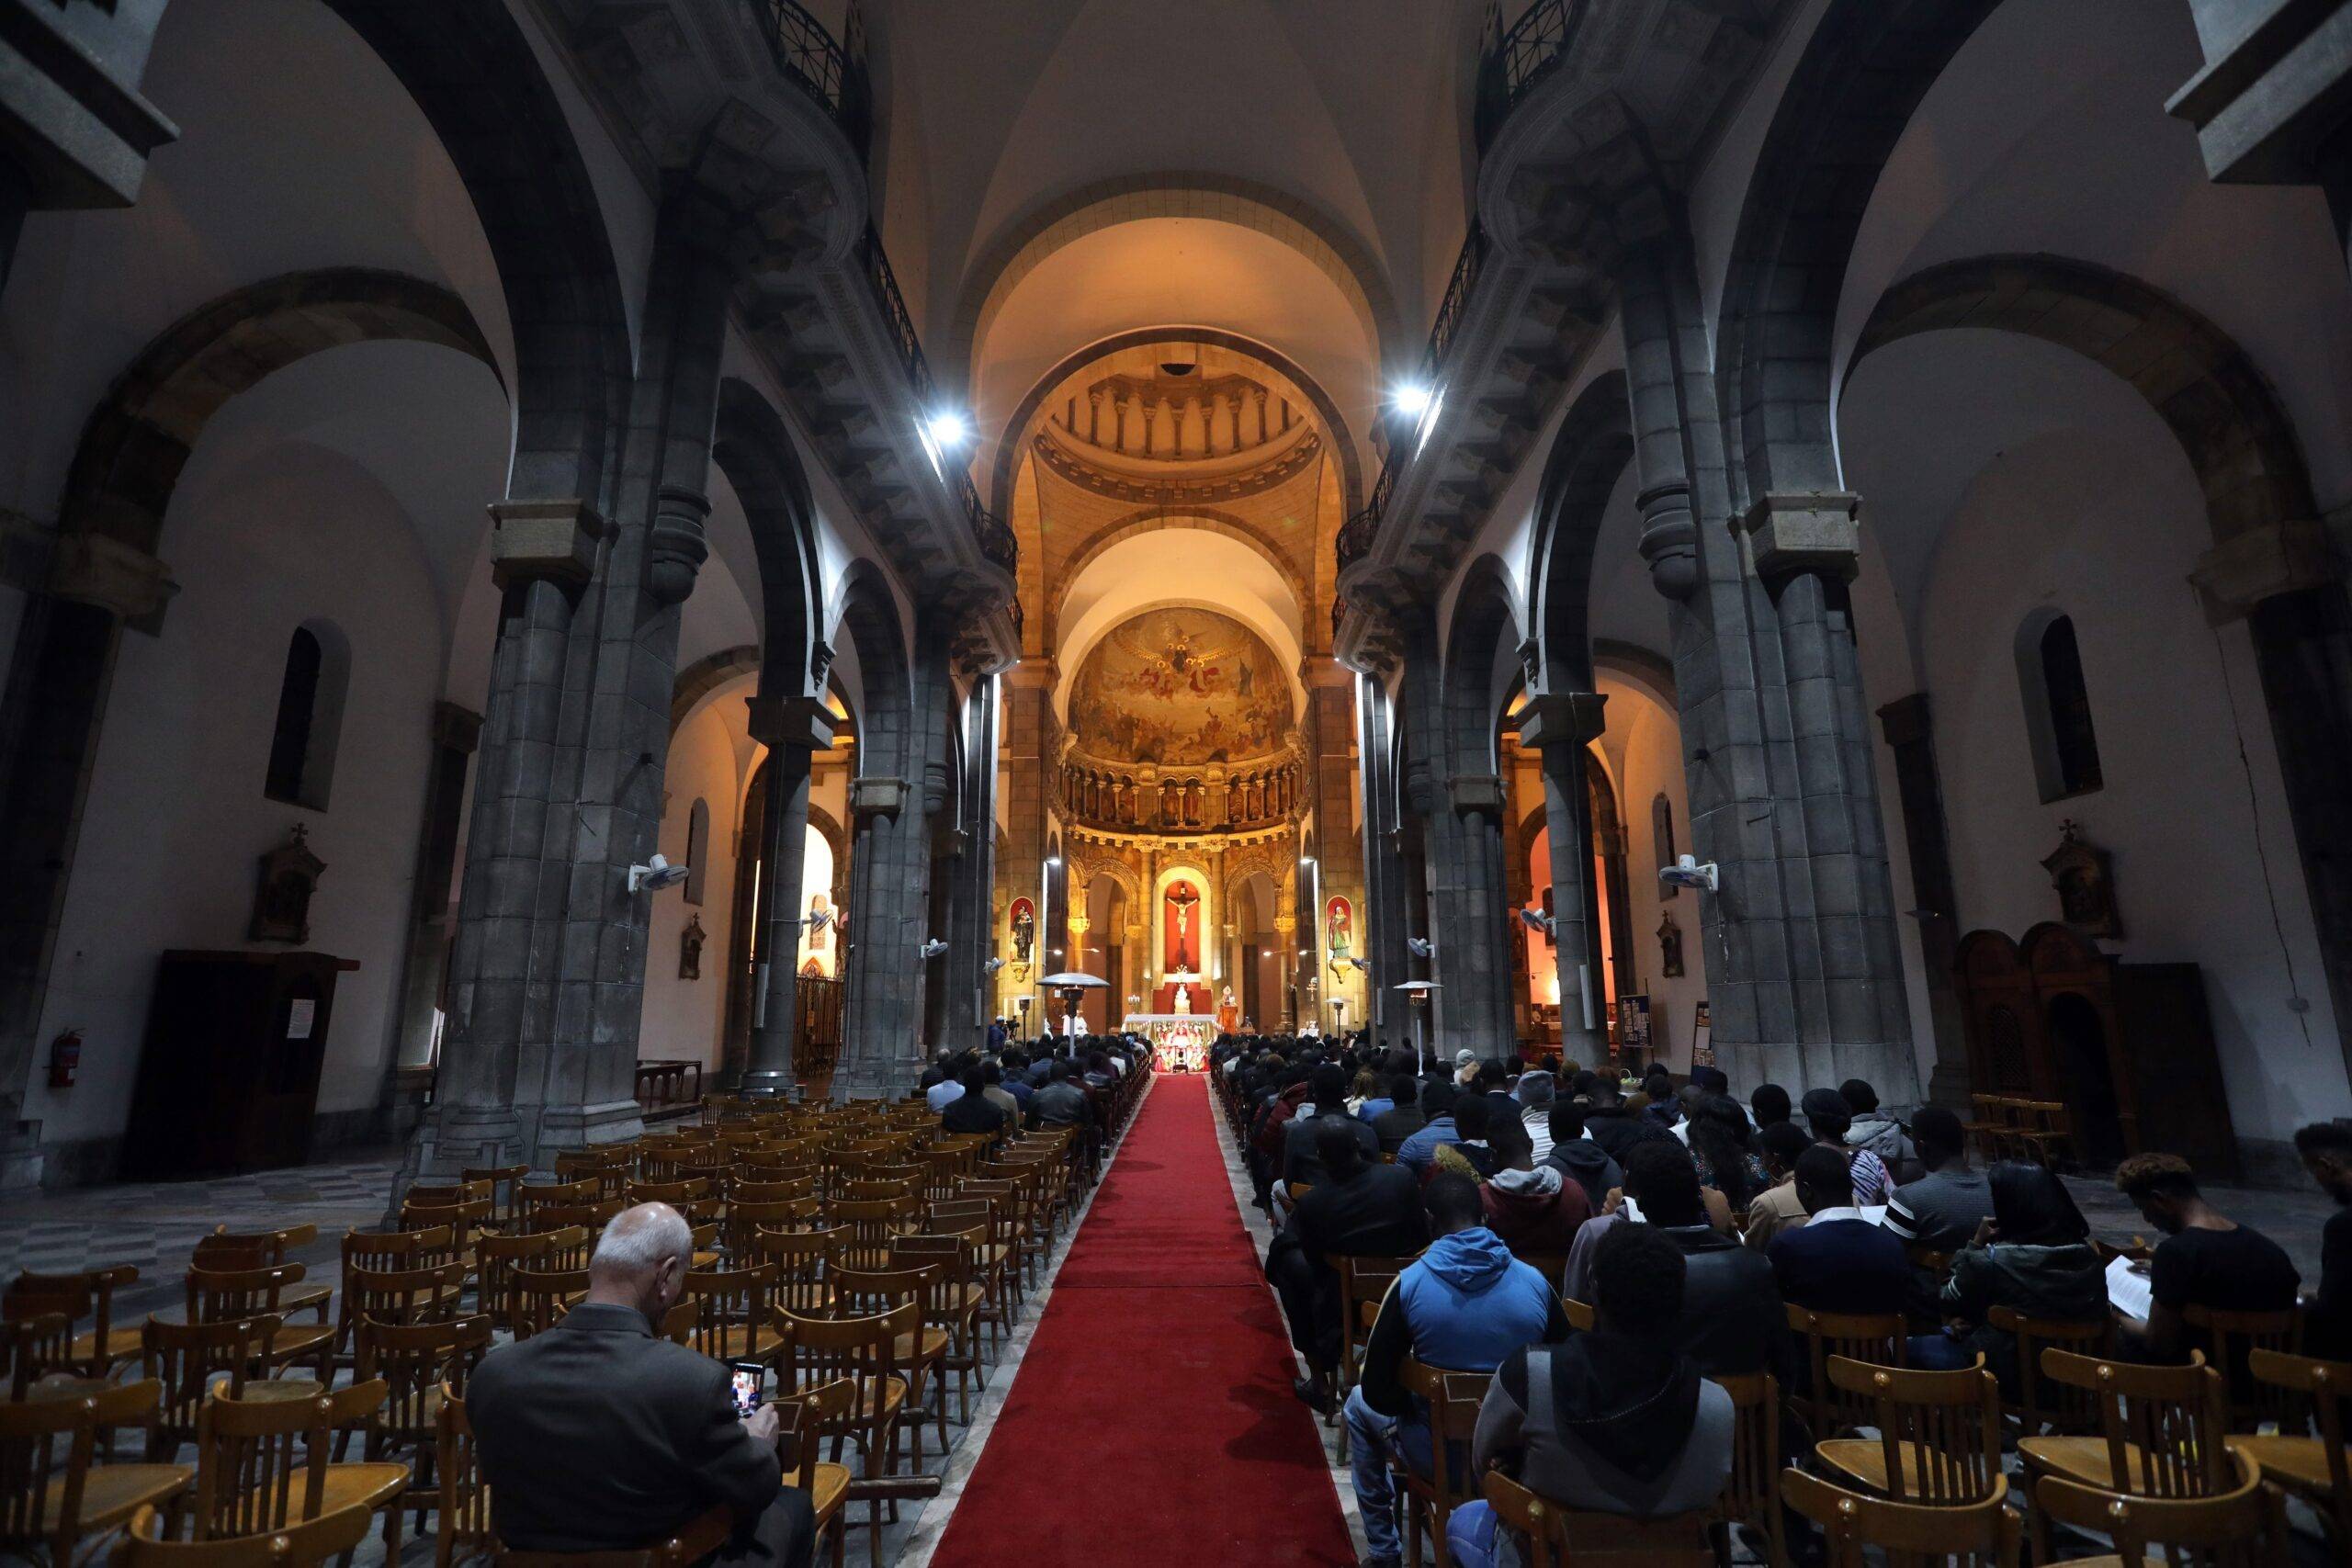 On Monday evening, the celebration of the birthday mass of Jesus Christ began with the ringing of the bells in the cathedral church in Tunis, headed by the Bishop of the Church of Elario Antonioni Christmas Eve in Tunis on 24 December 2018 [Yassine Gaidi/Anadolu Agency]